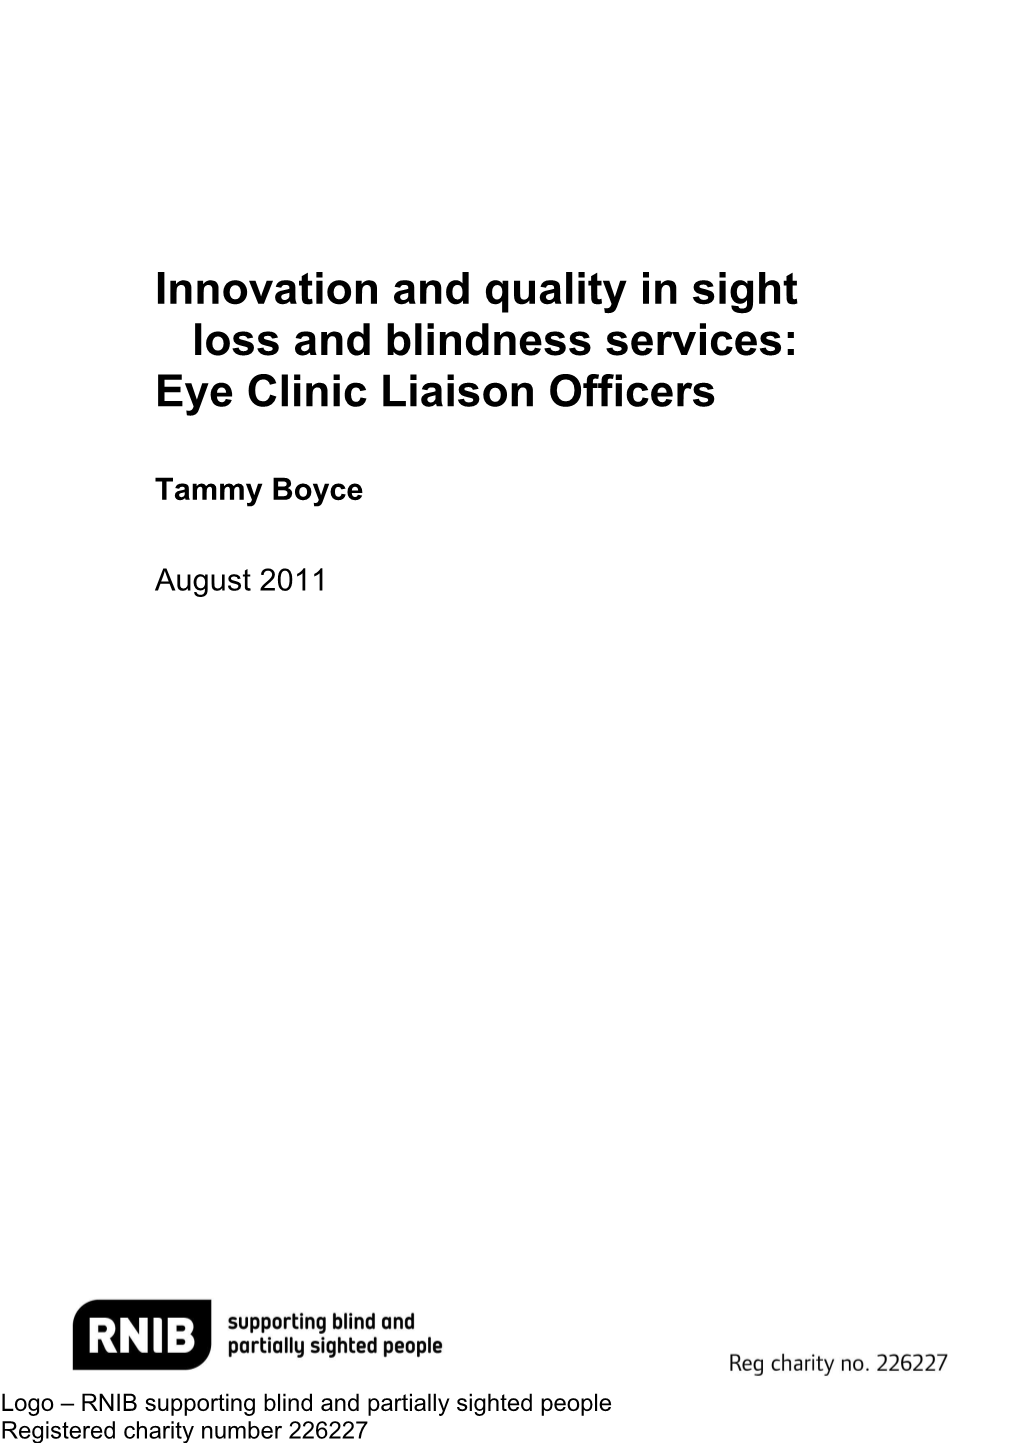 Innovation and Quality in Eye Clinic Liaison Services